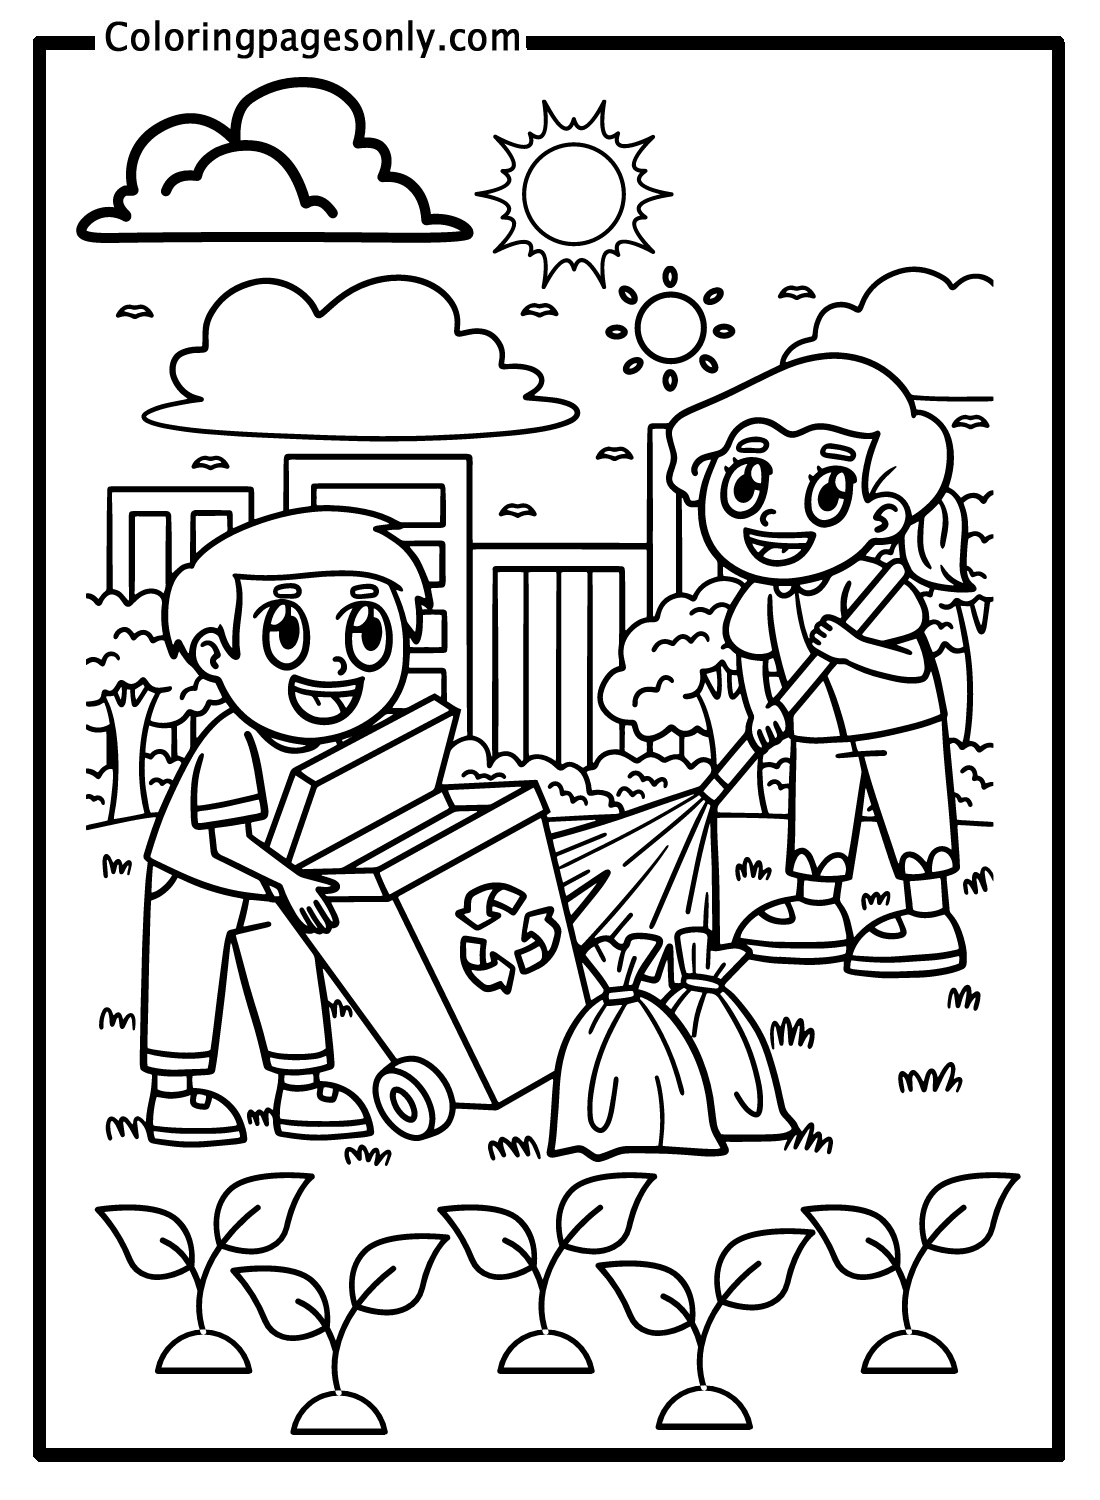 Children Cleaning the Trash Coloring Page